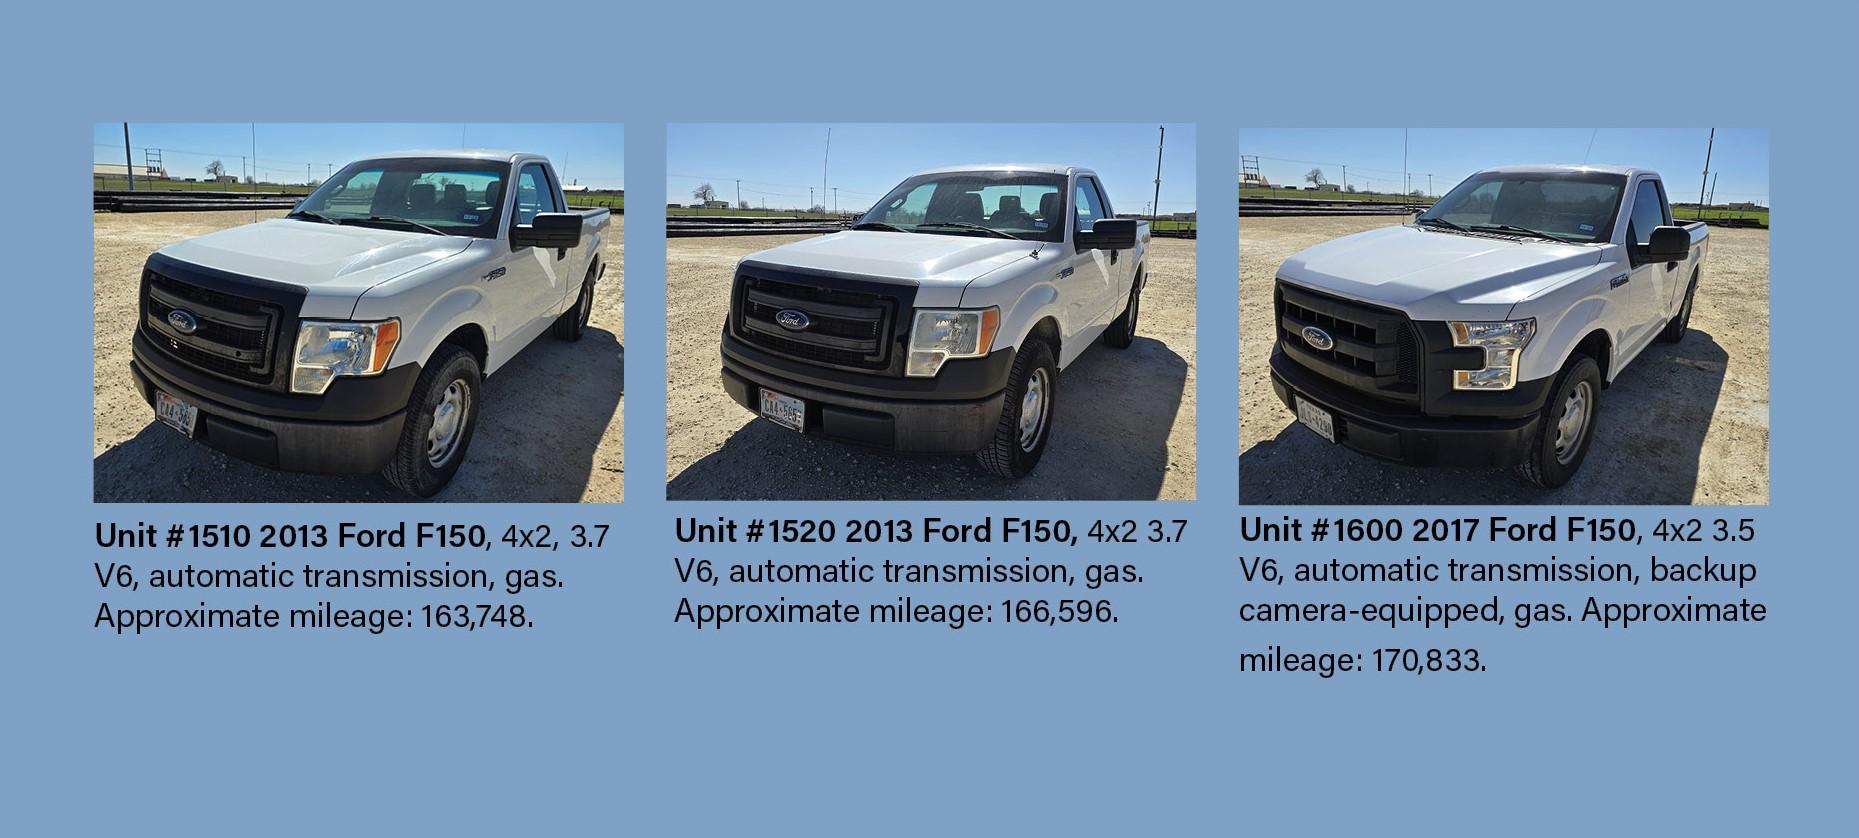 Vehicles up for auction